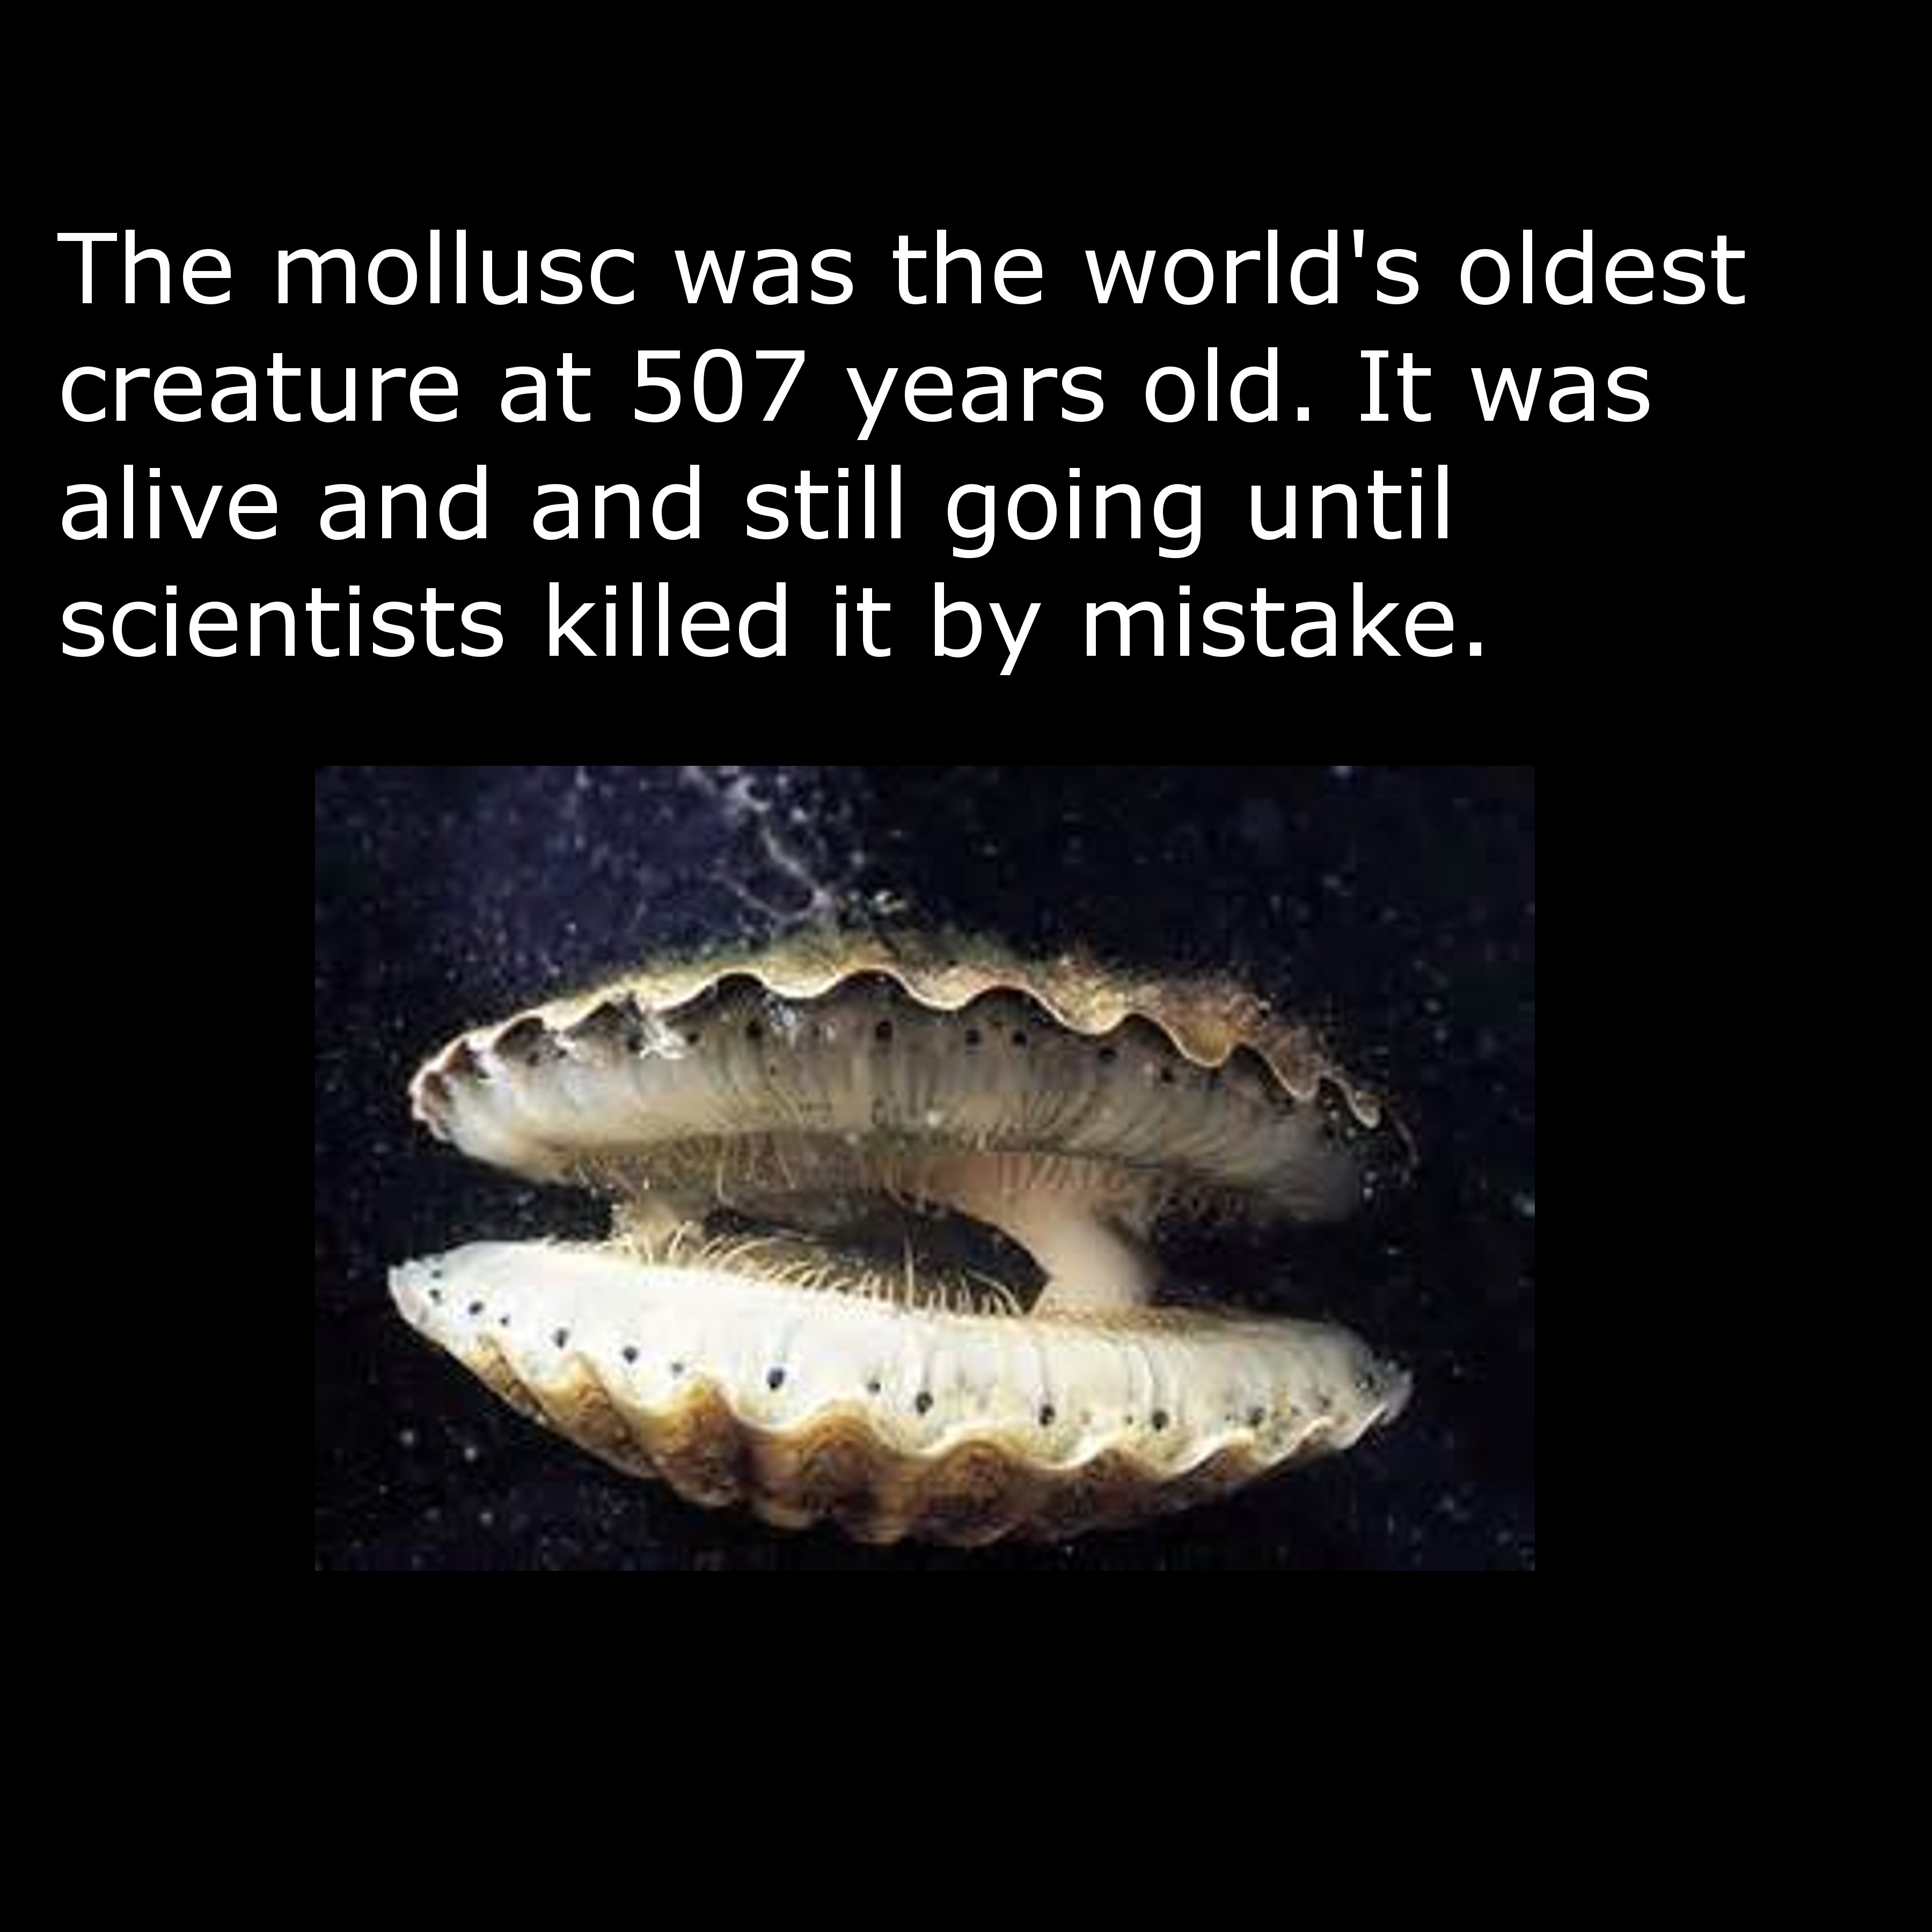 mollusca animals - The mollusc was the world's oldest creature at 507 years old. It was alive and and still going until scientists killed it by mistake.